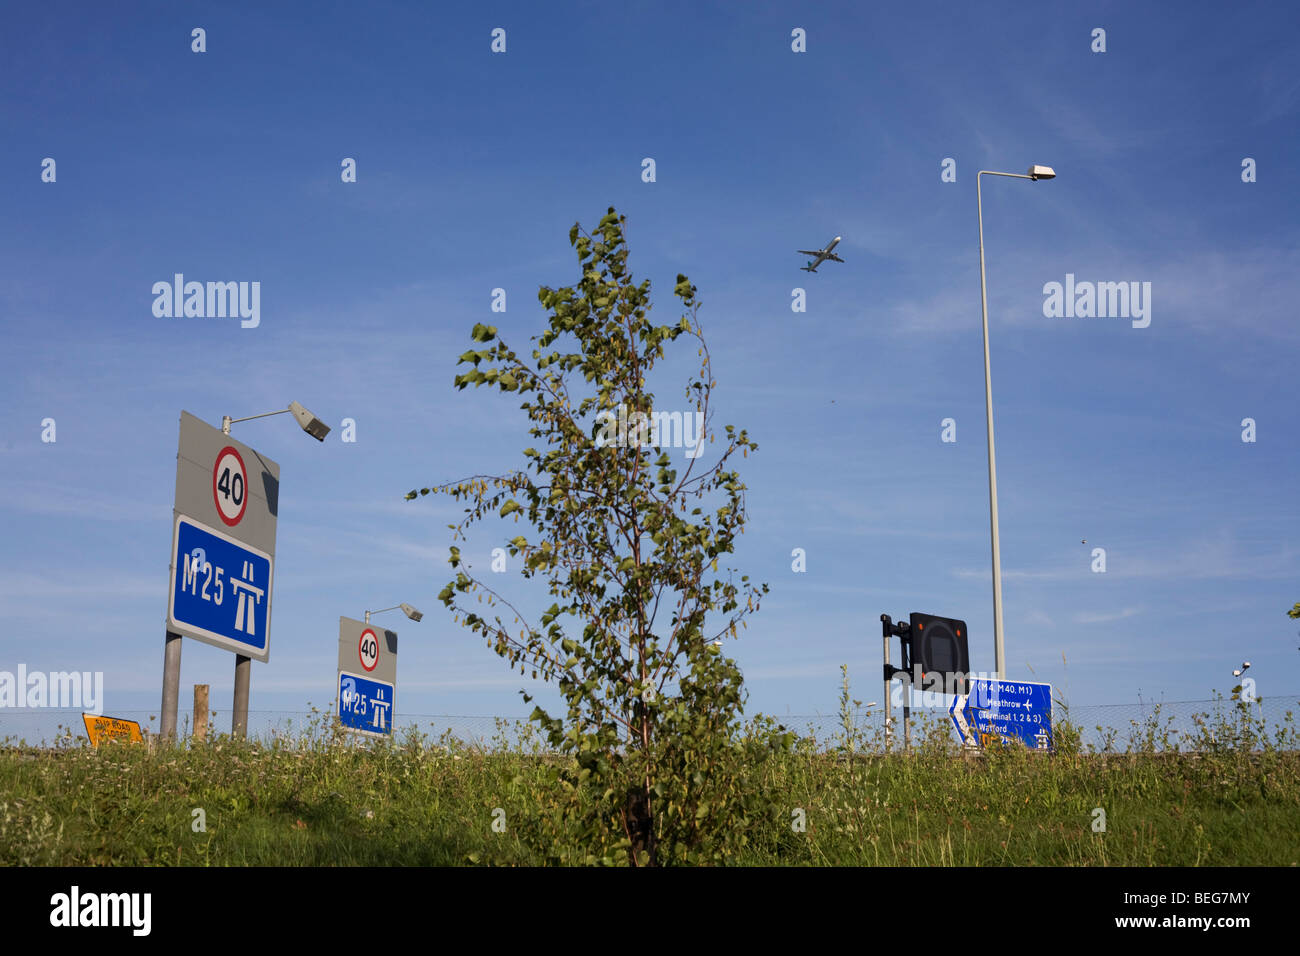 A passing airliner that passes overhead on a flight-path from Heathrow airport over M25 at Poyle on Colne Valley Way. Stock Photo